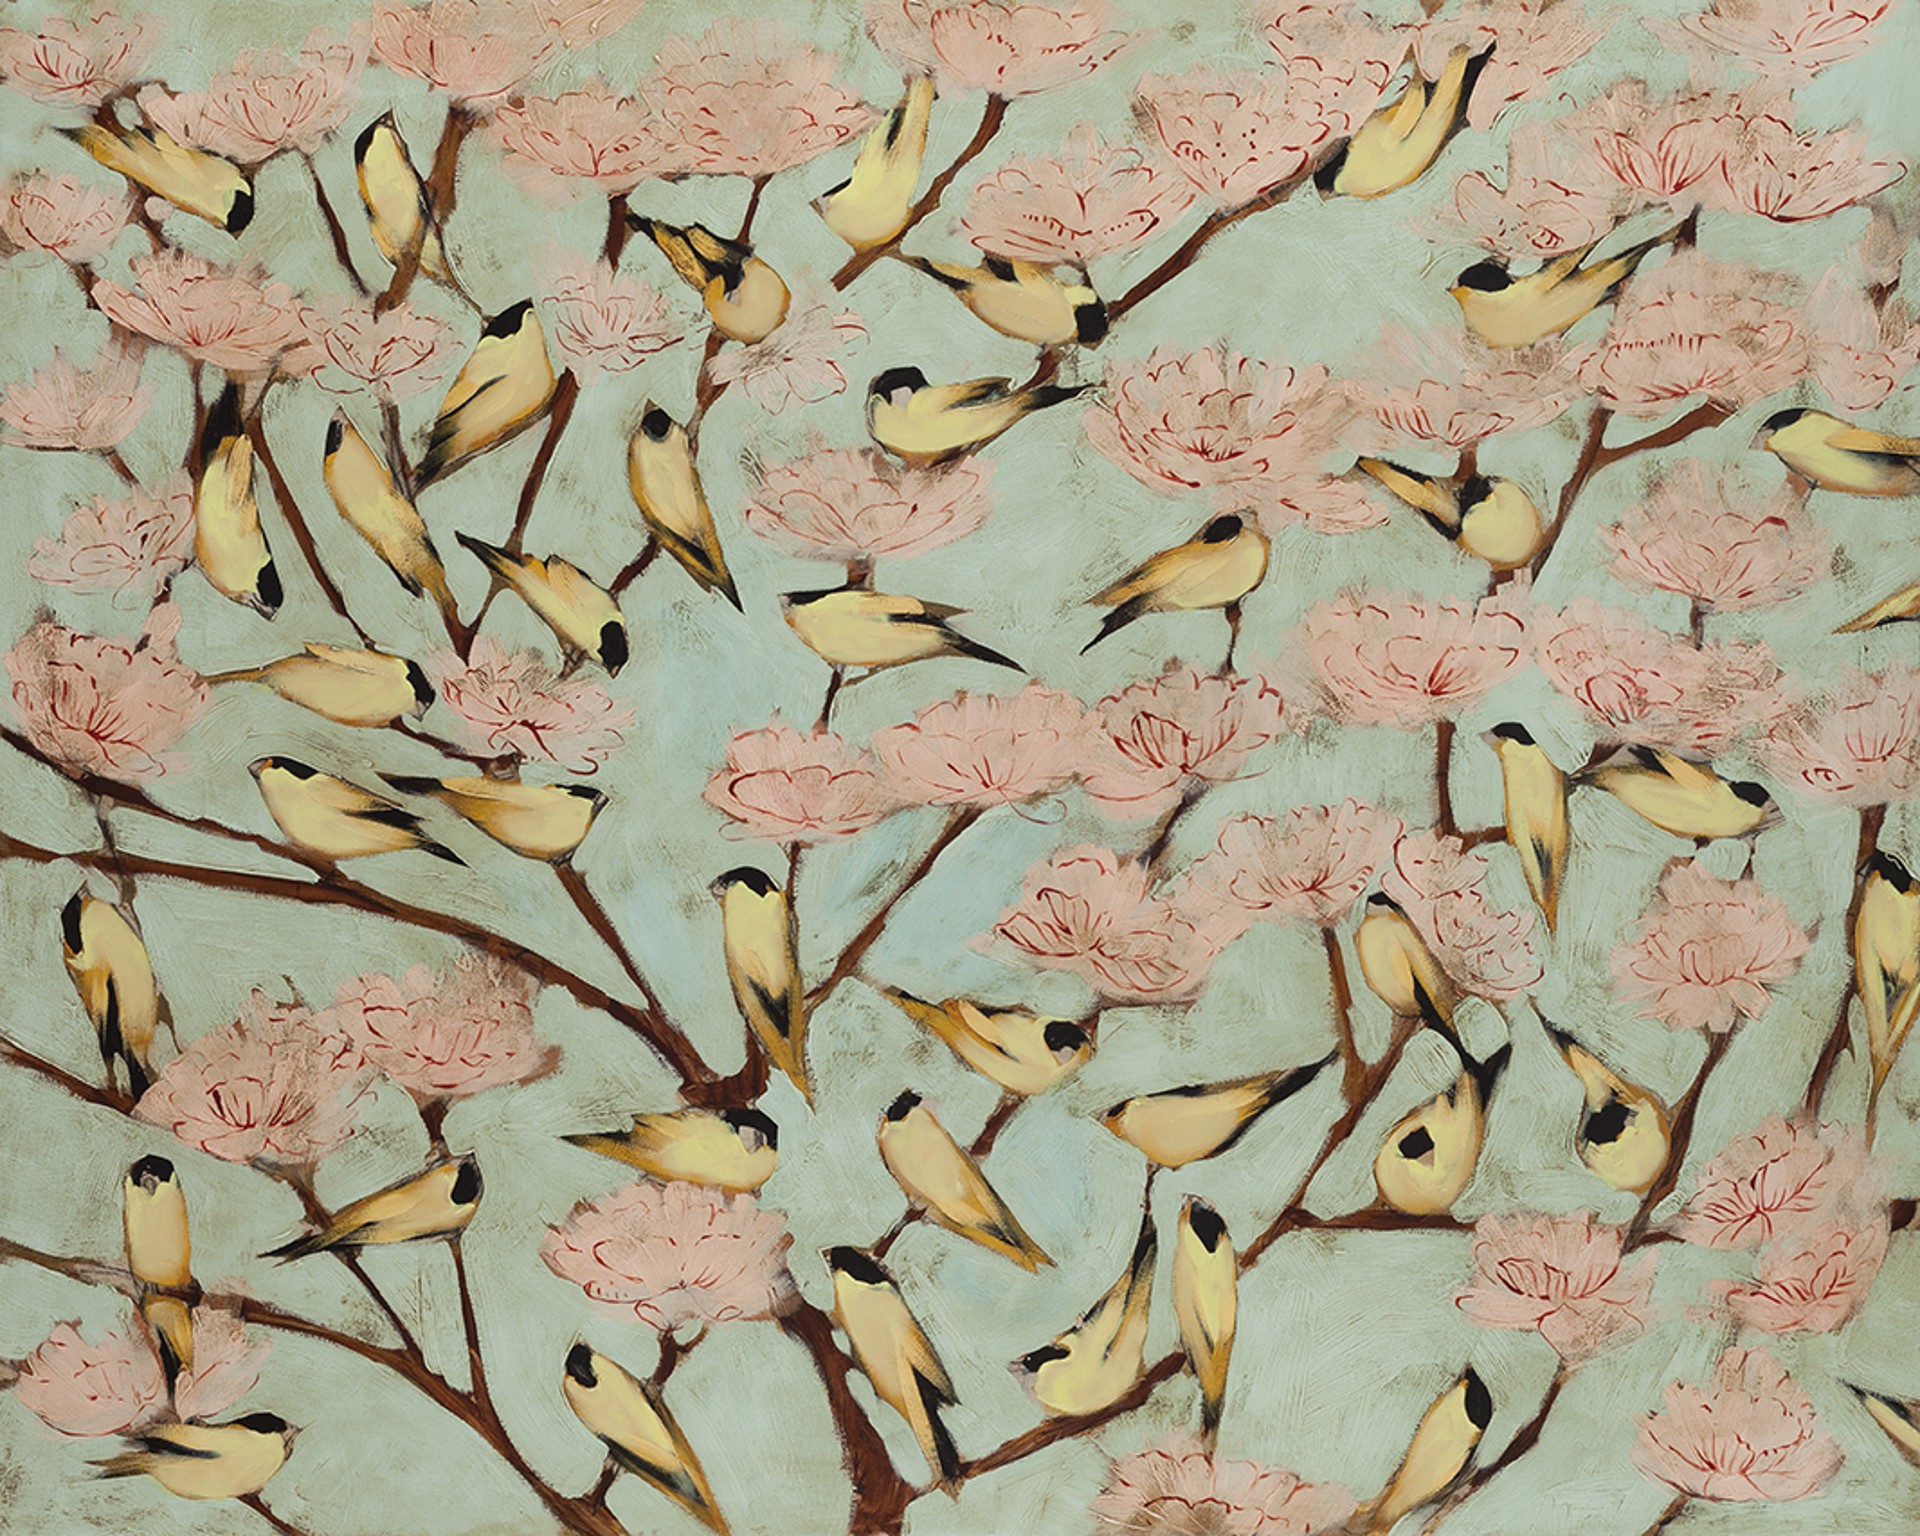 Finches and Blossoms  48x60 by Joseph Bradley